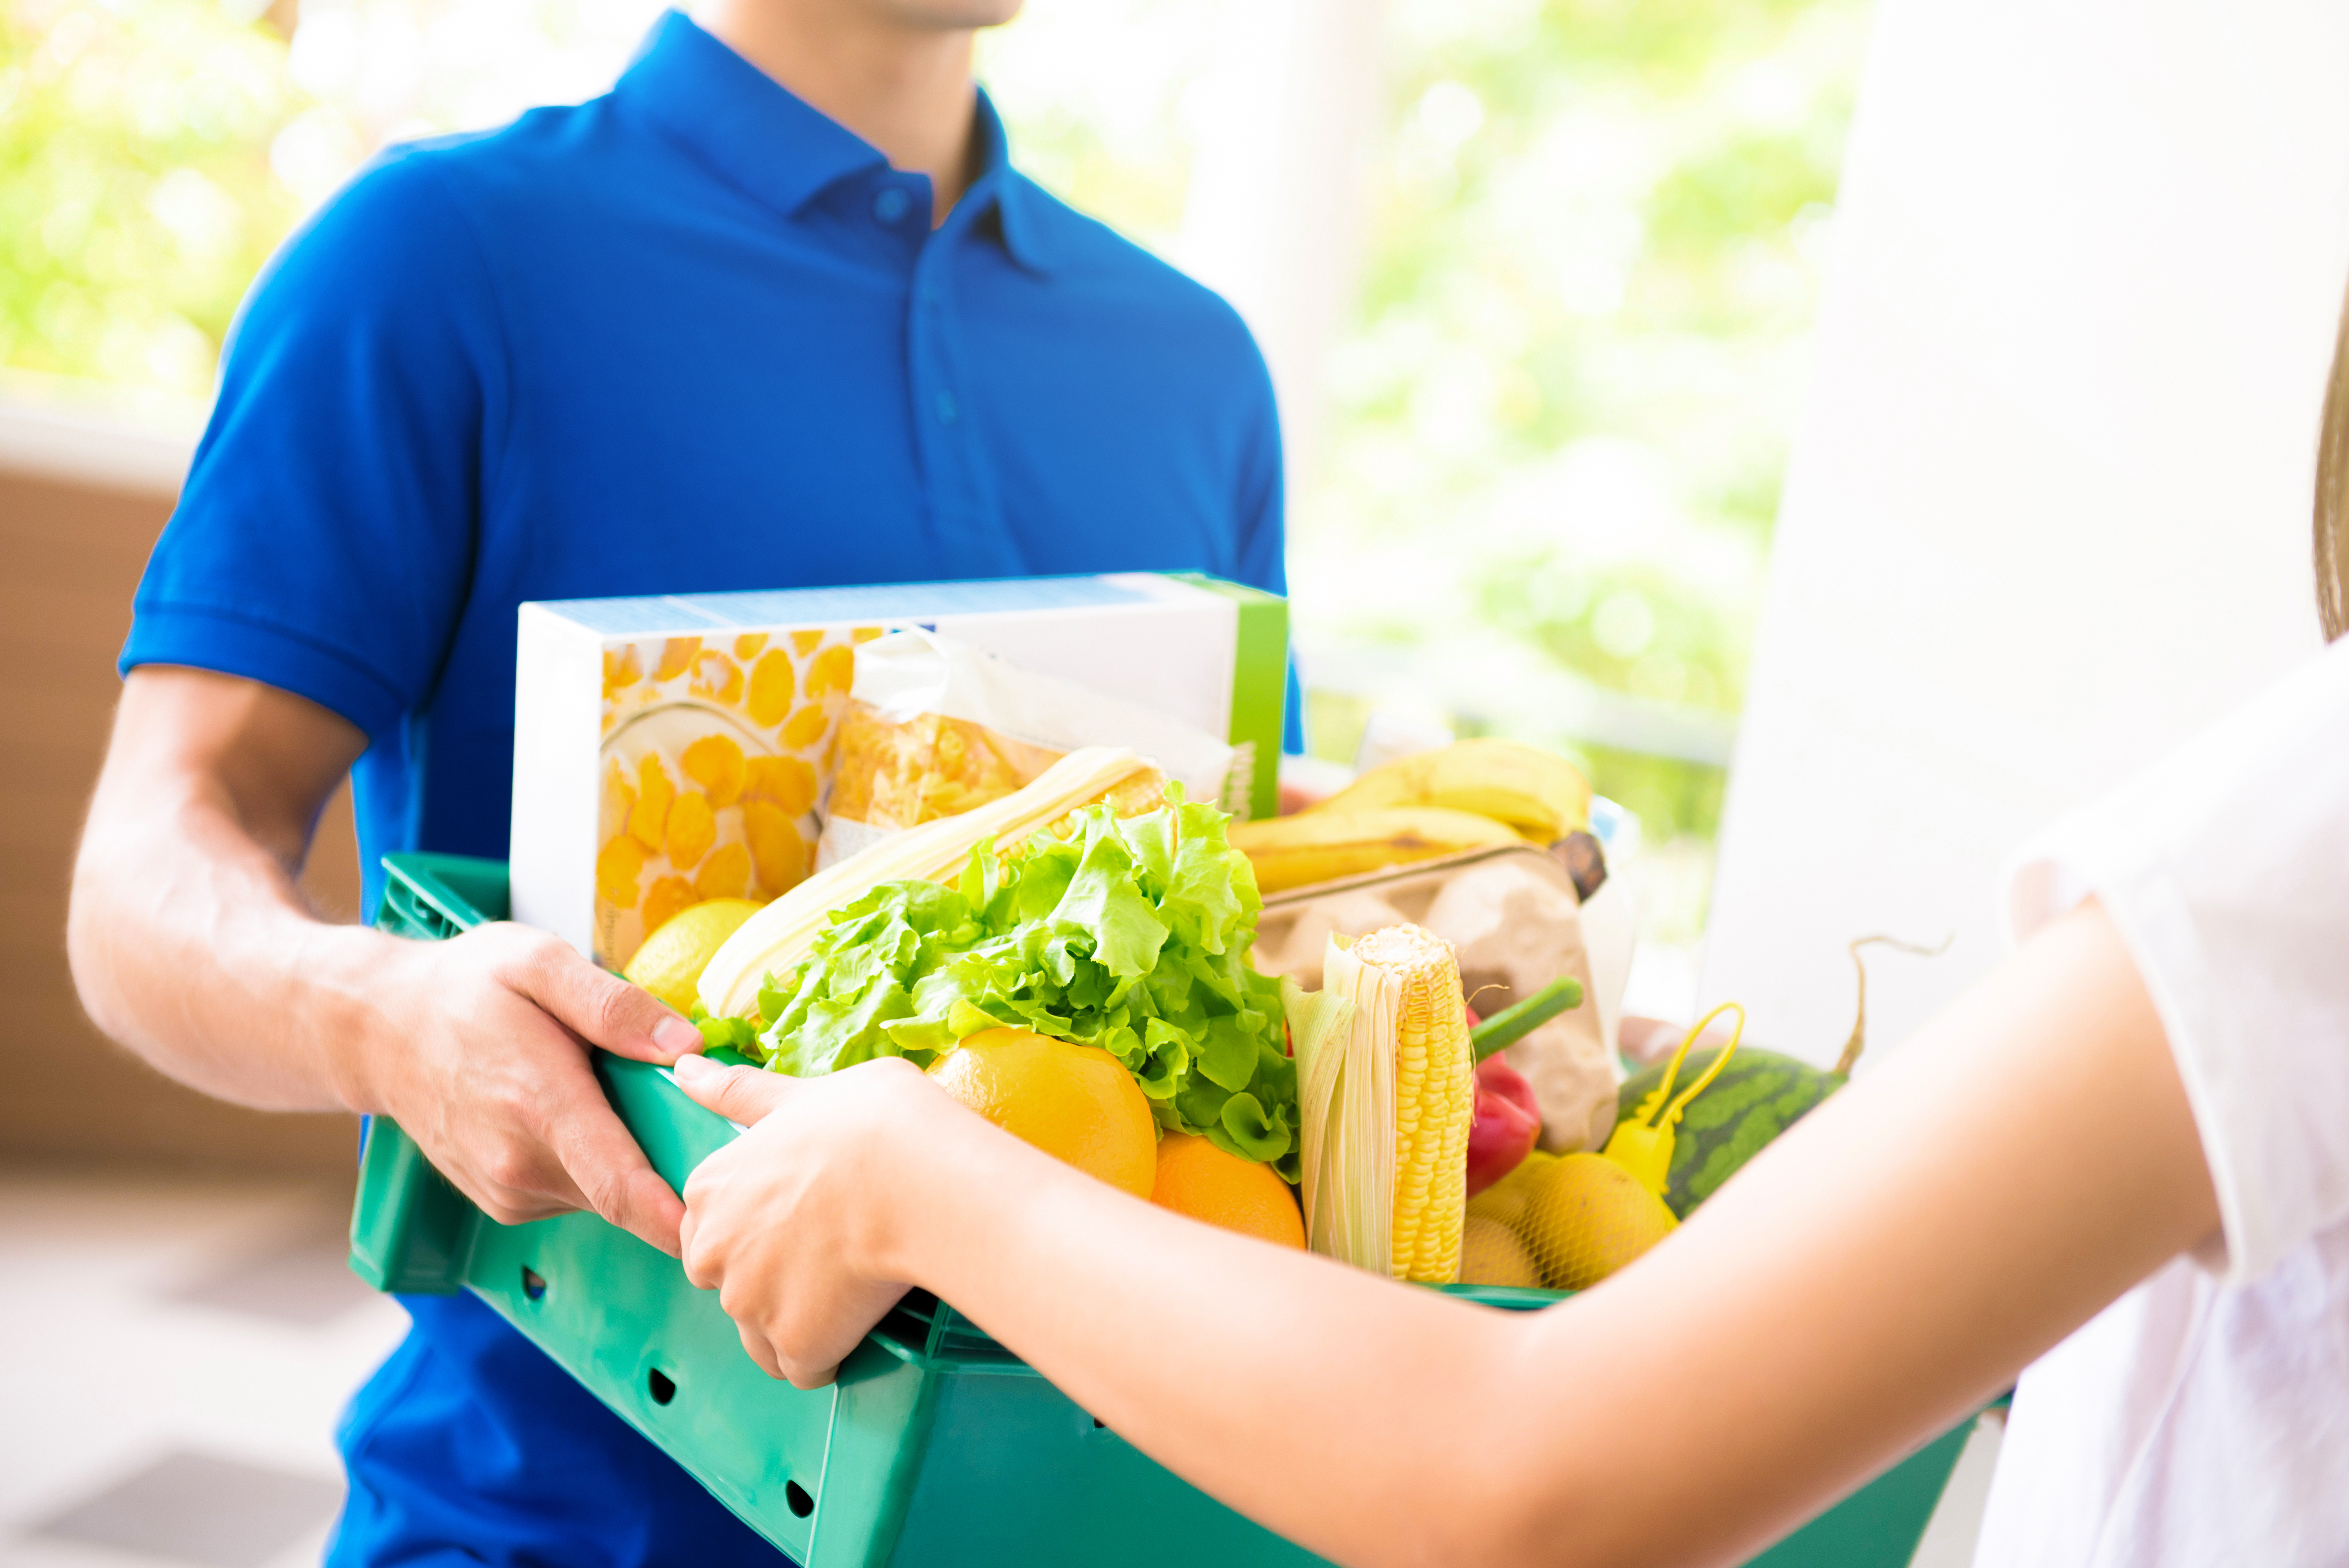 Delivery driver handing over box of groceries